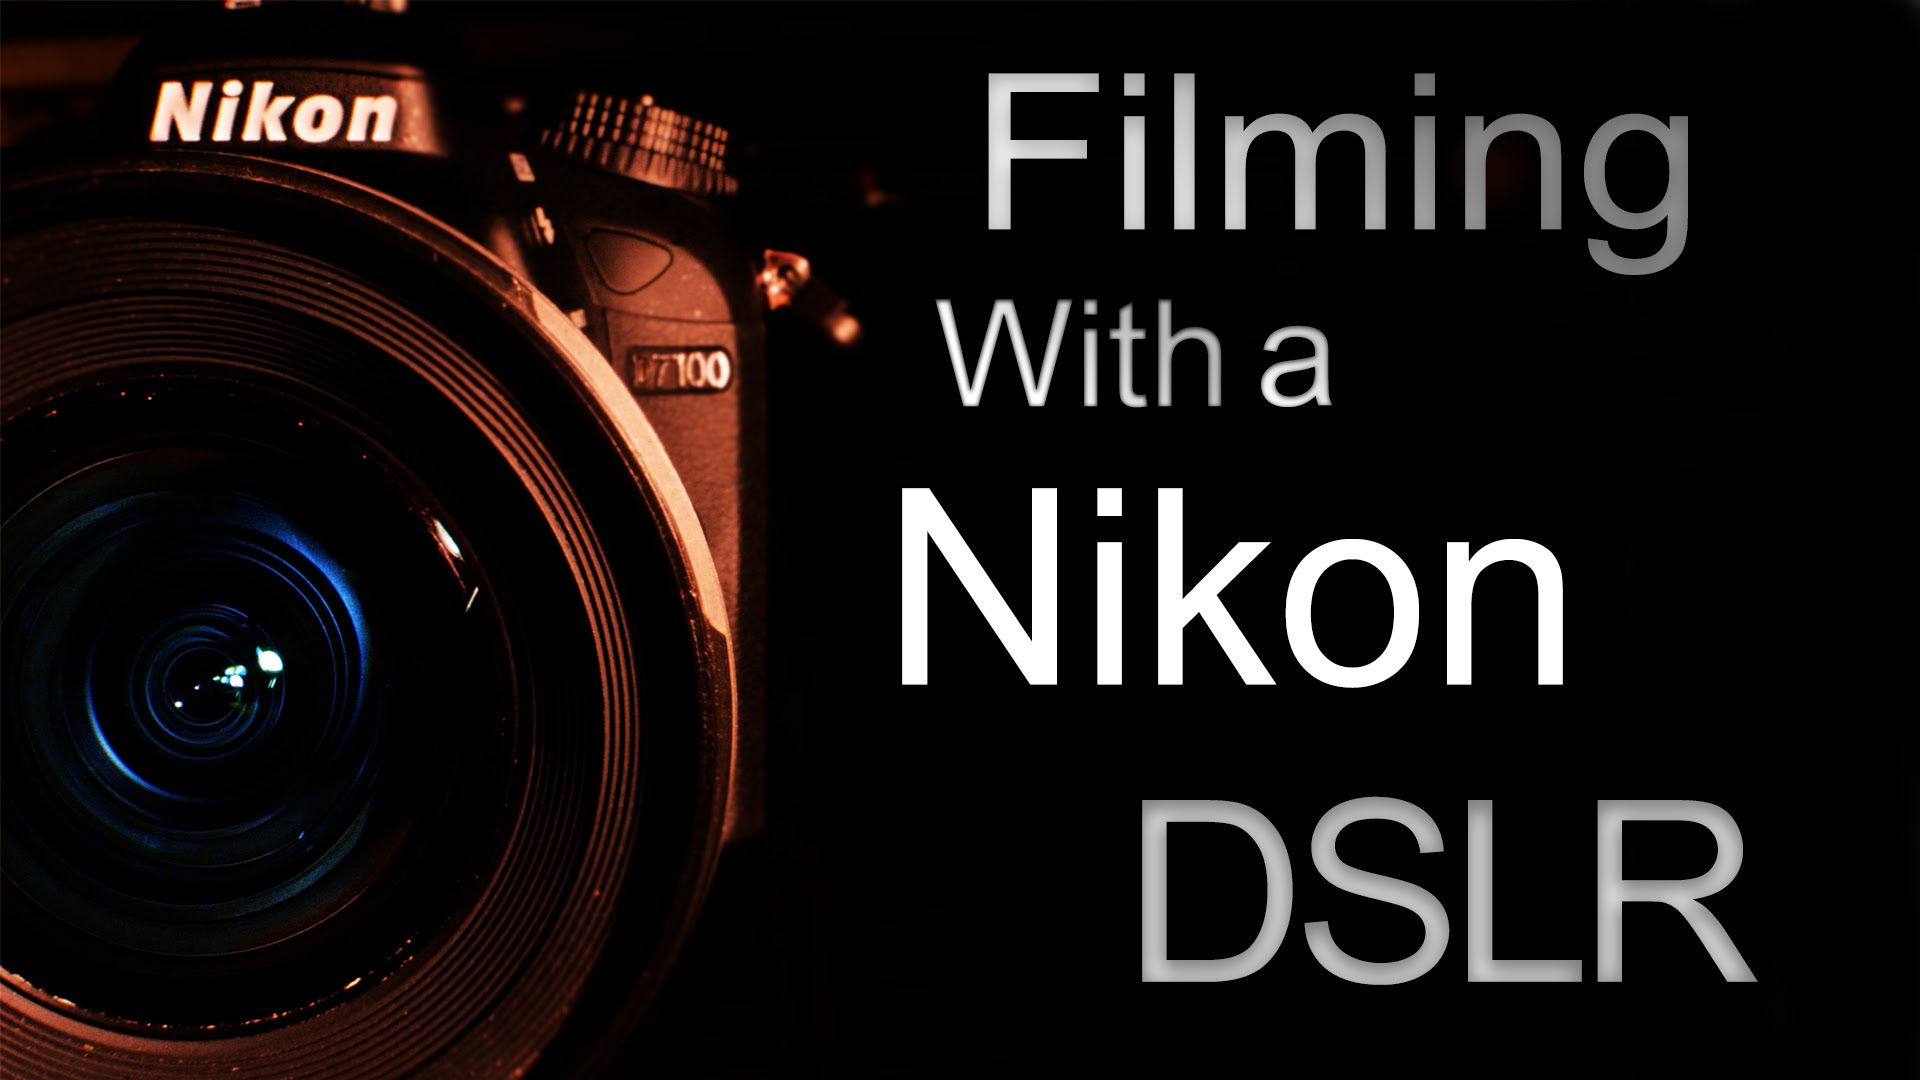 Filming With a Nikon DSLR